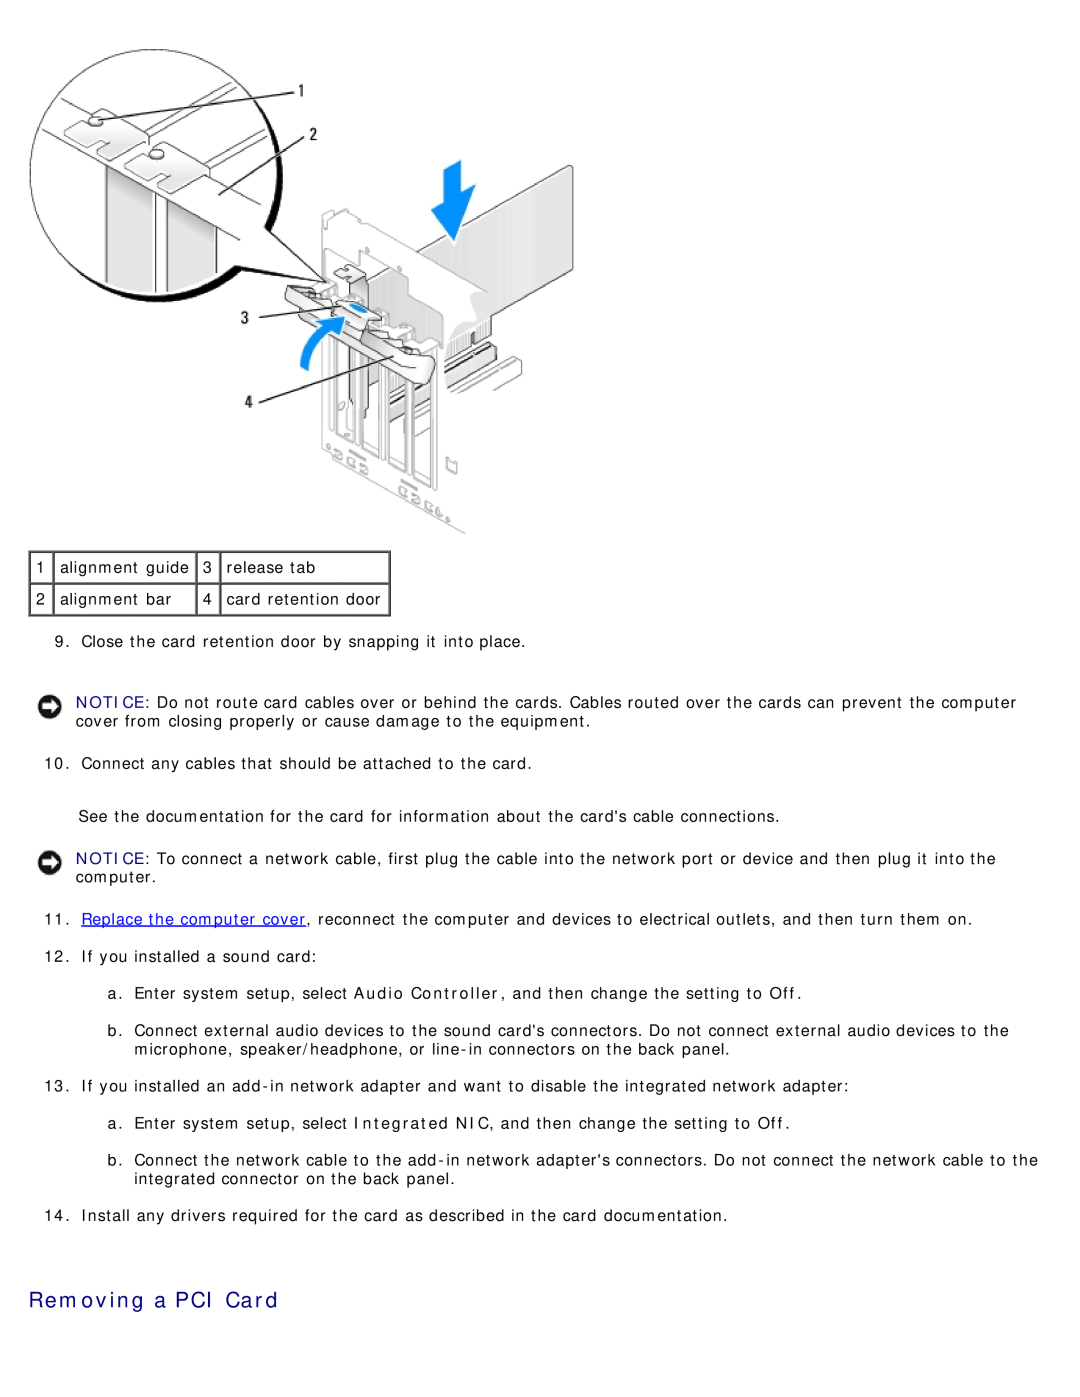 Dell DCSM manual Removing a PCI Card, card retention door 